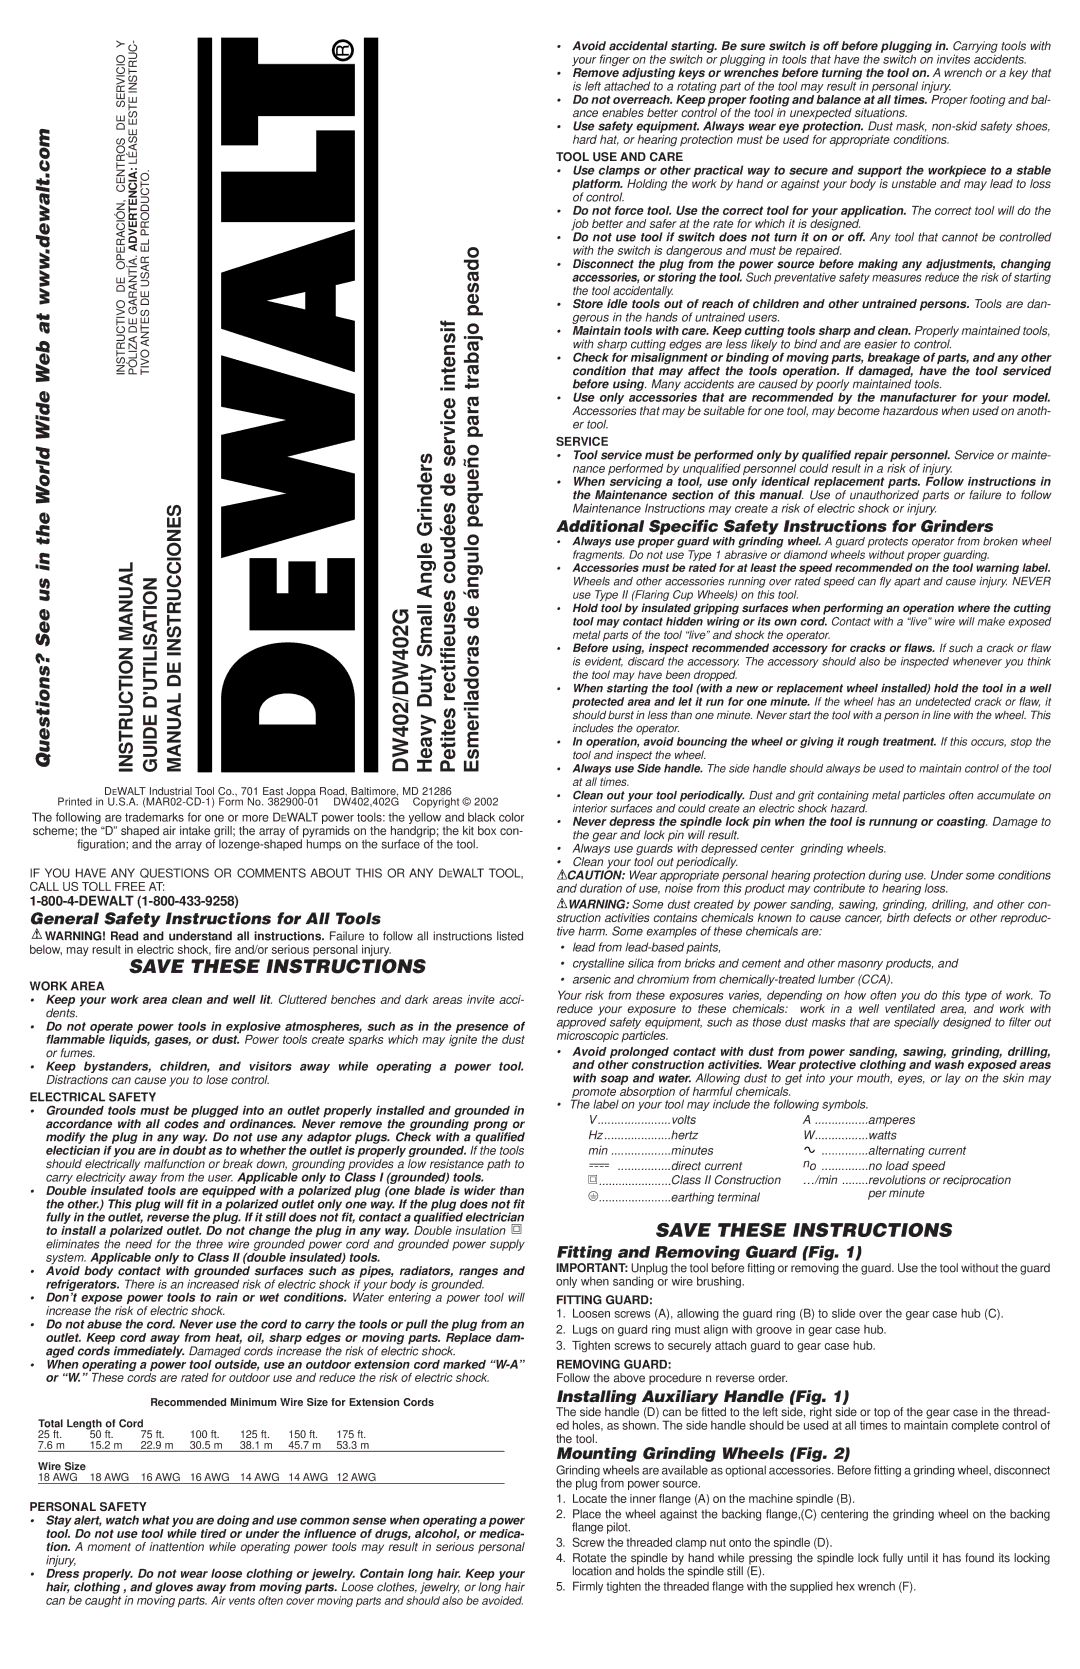 DeWalt DW402G instruction manual General Safety Instructions for All Tools, Fitting and Removing Guard Fig 